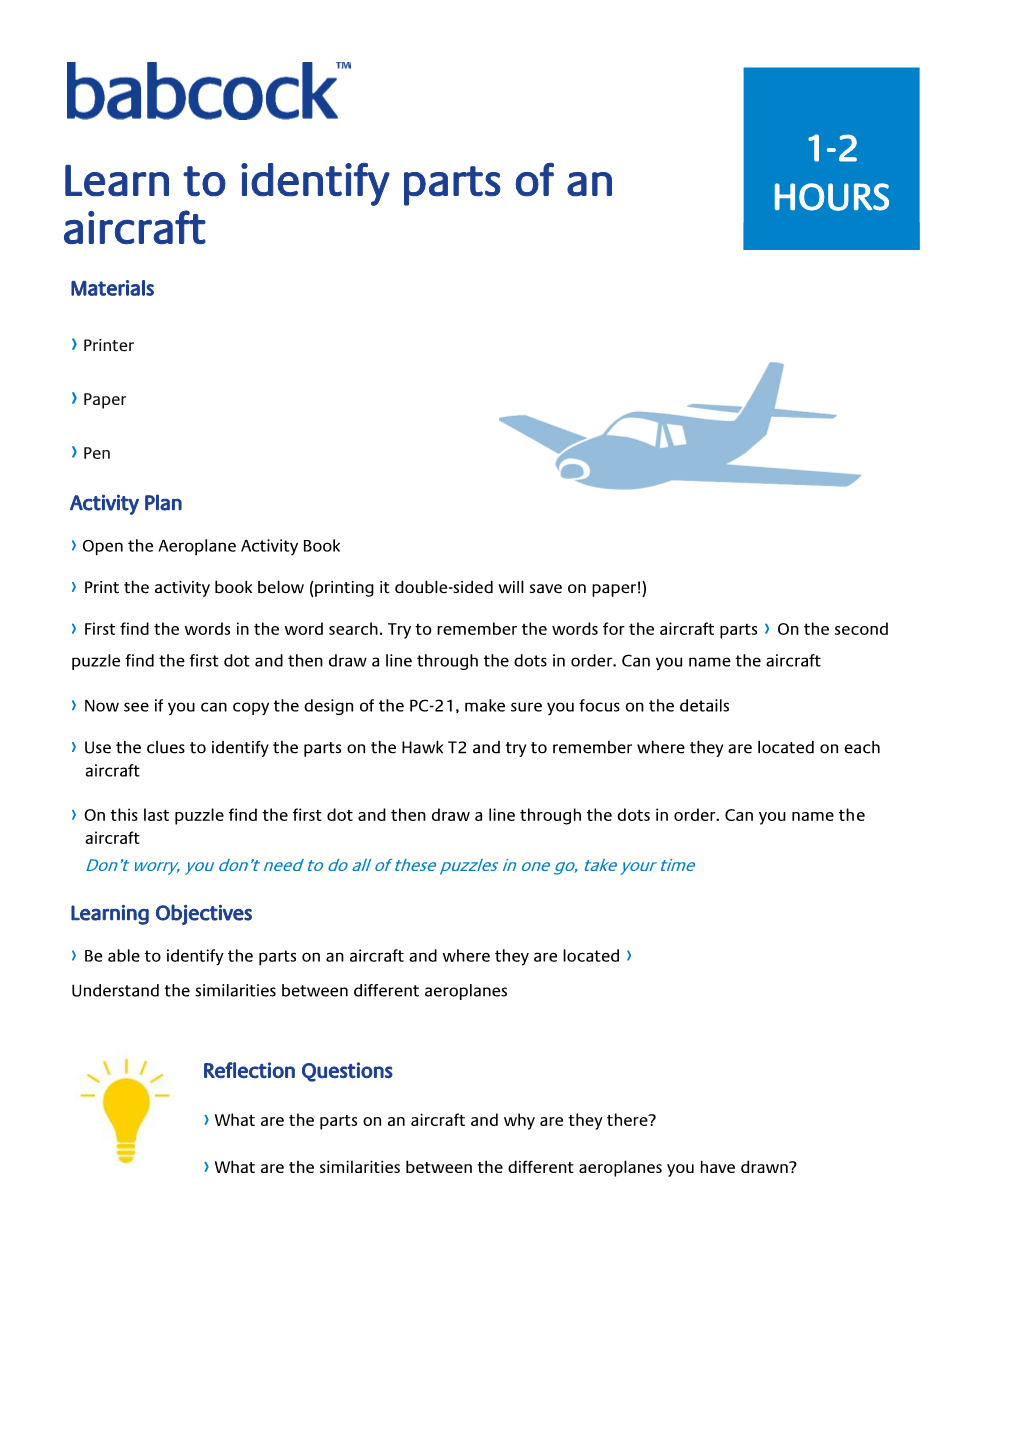 Learn to Identify Parts of an Aircraft